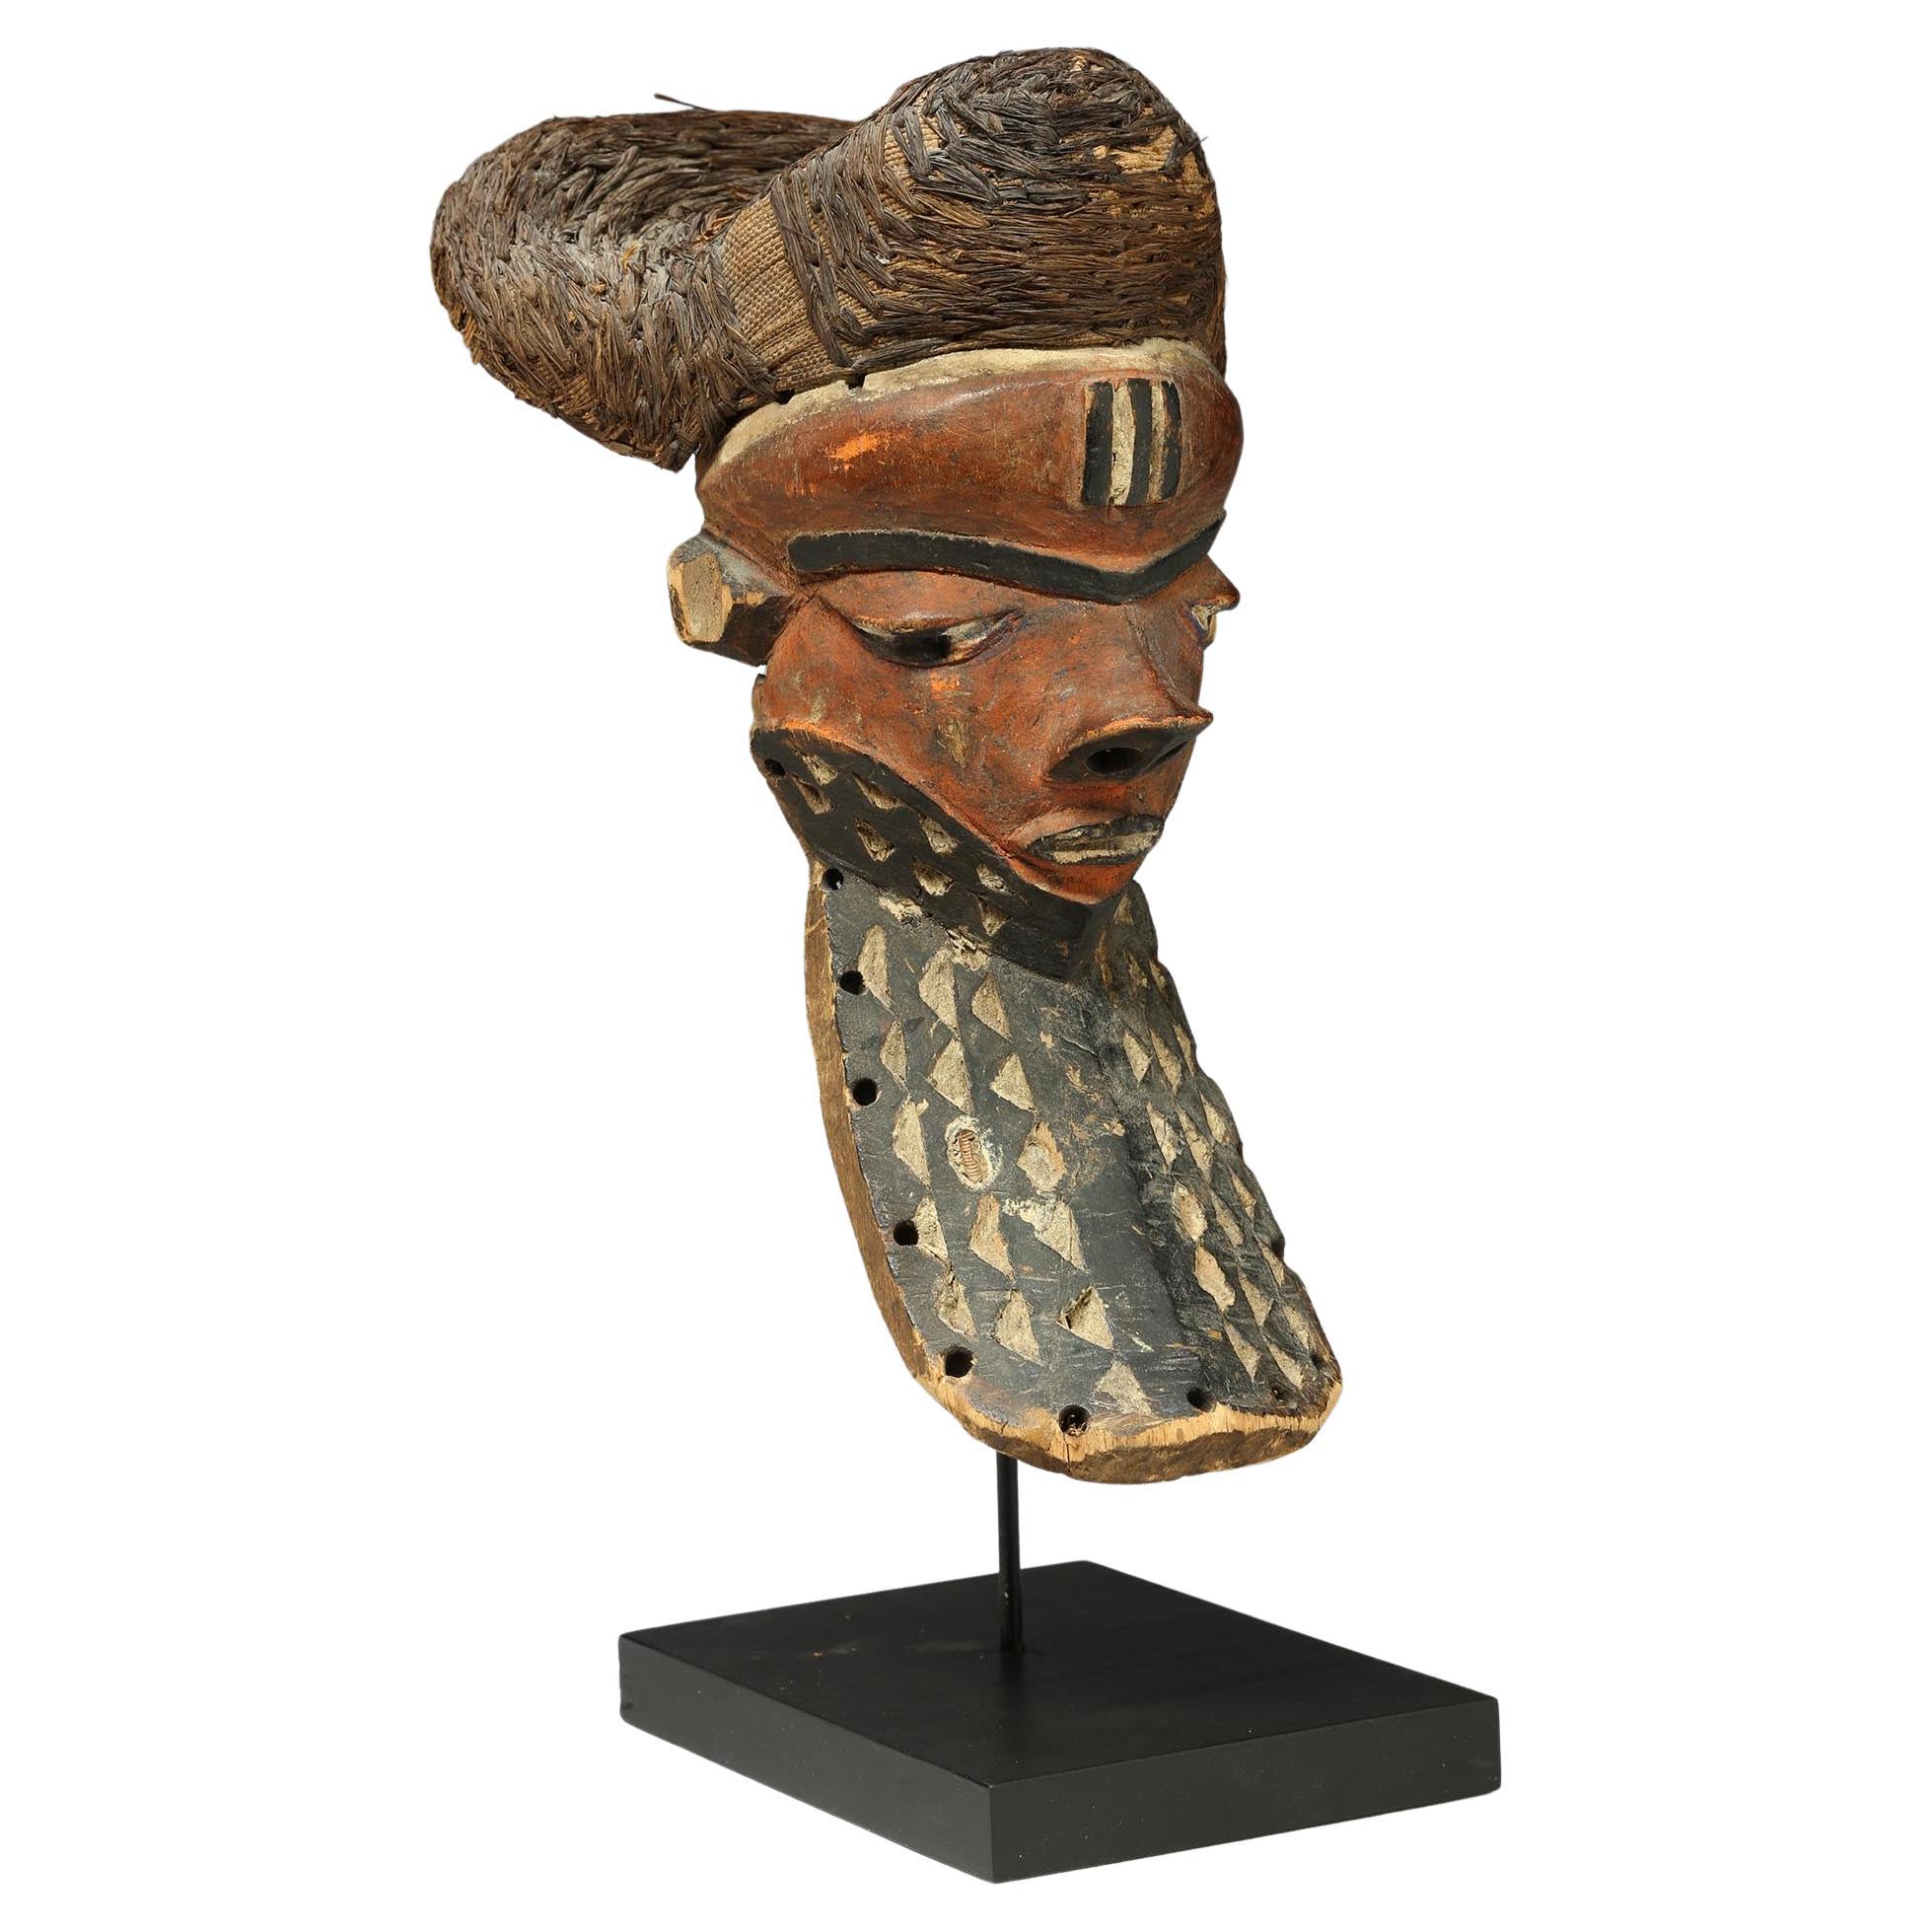 Old Pende giwoyo Red Mask with Beard and Woven Raffia Hair Cap Congo Africa